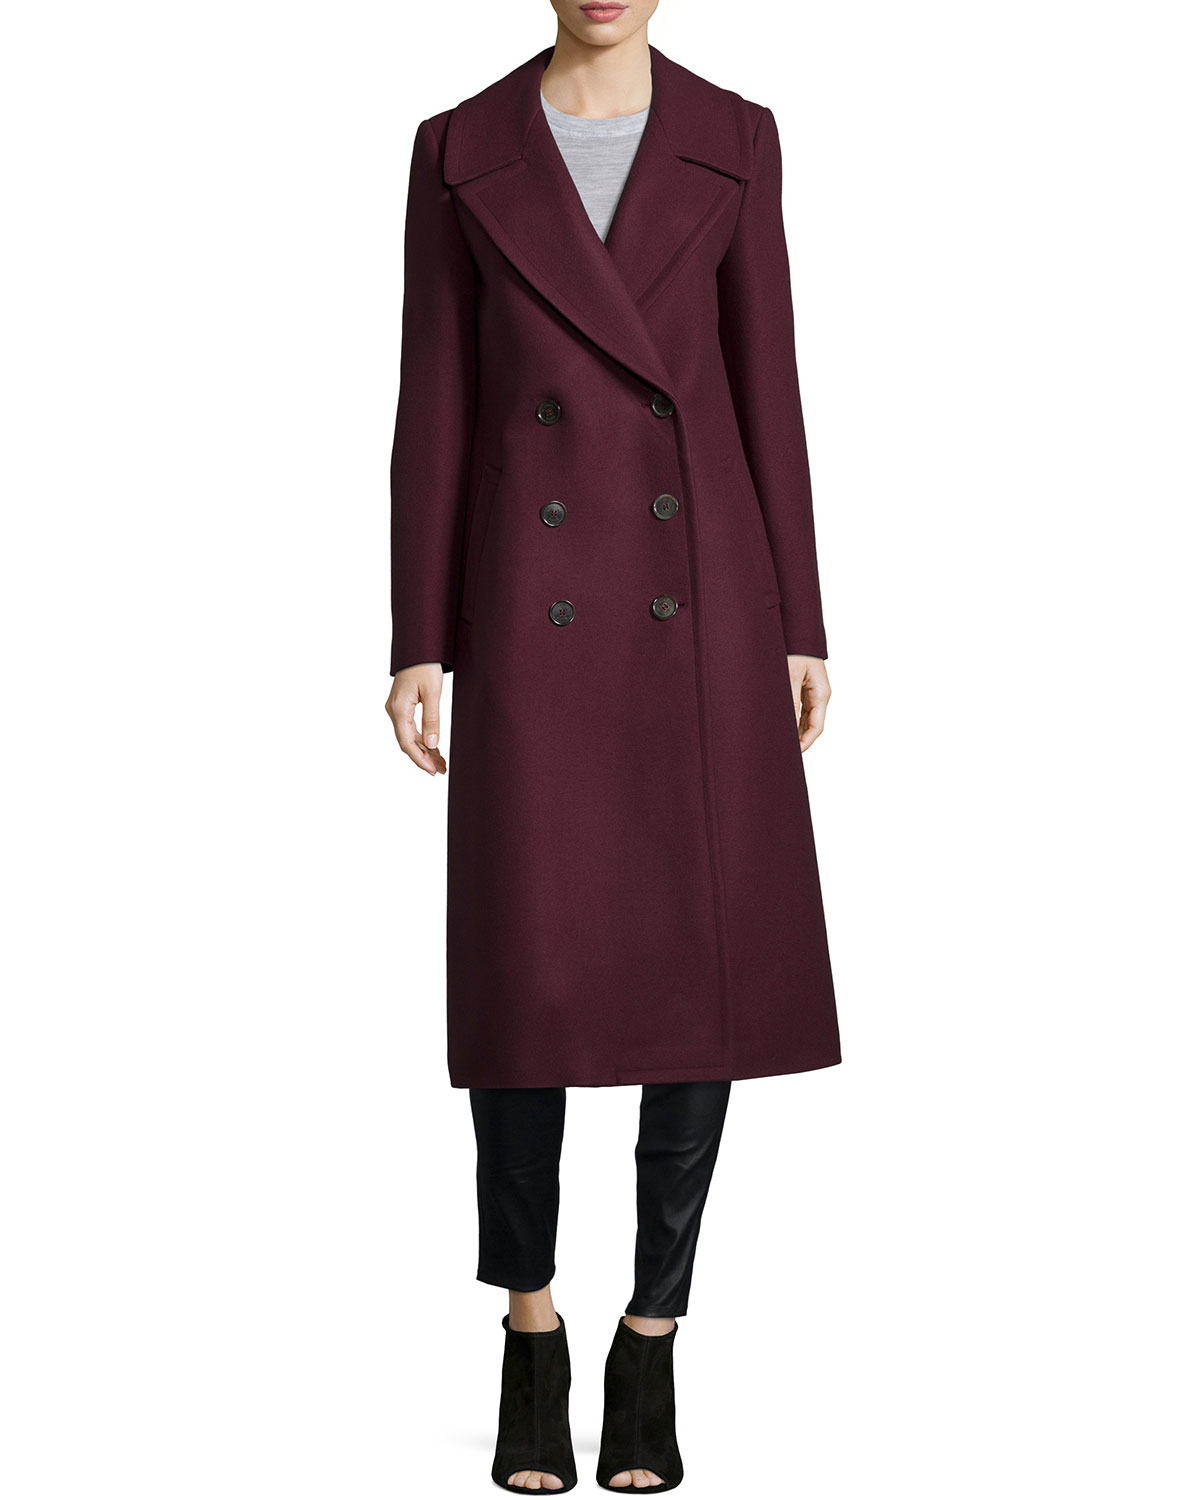 Lyst - Michael kors Melton Double-breasted Long Coat in Red for Men